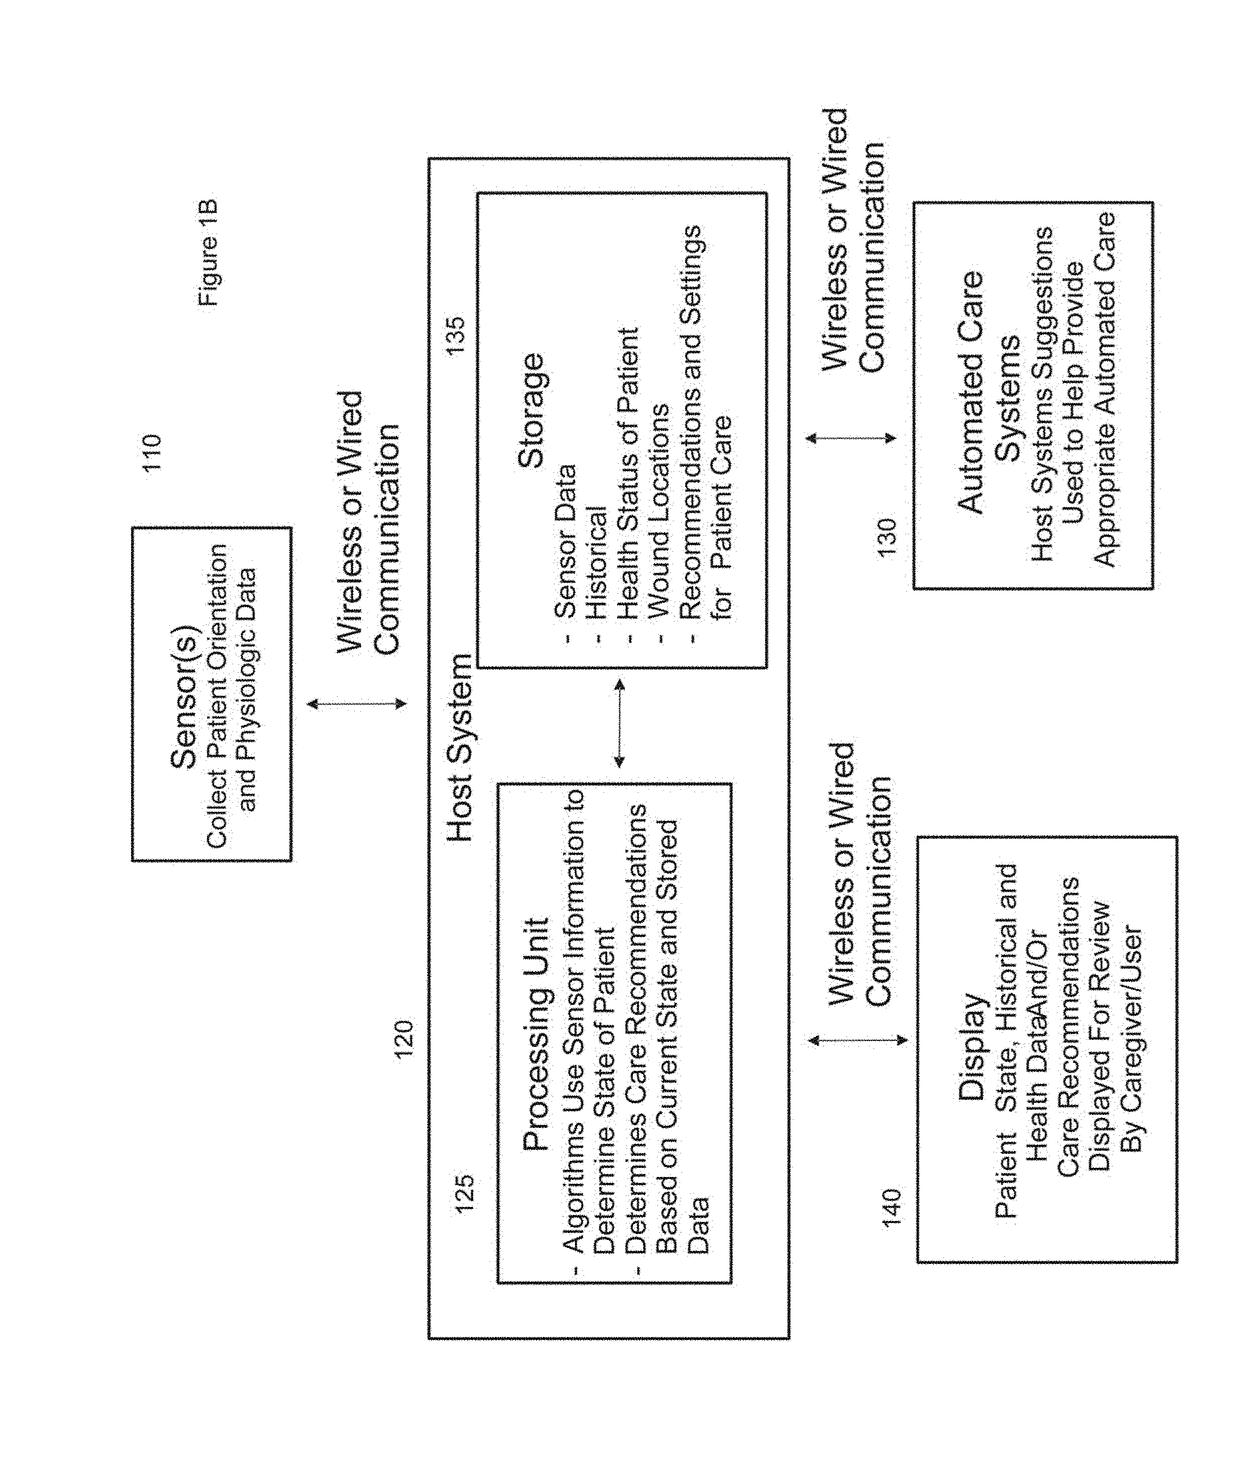 Systems, devices and methods for the prevention and treatment of pressure ulcers, bed exits, falls, and other conditions